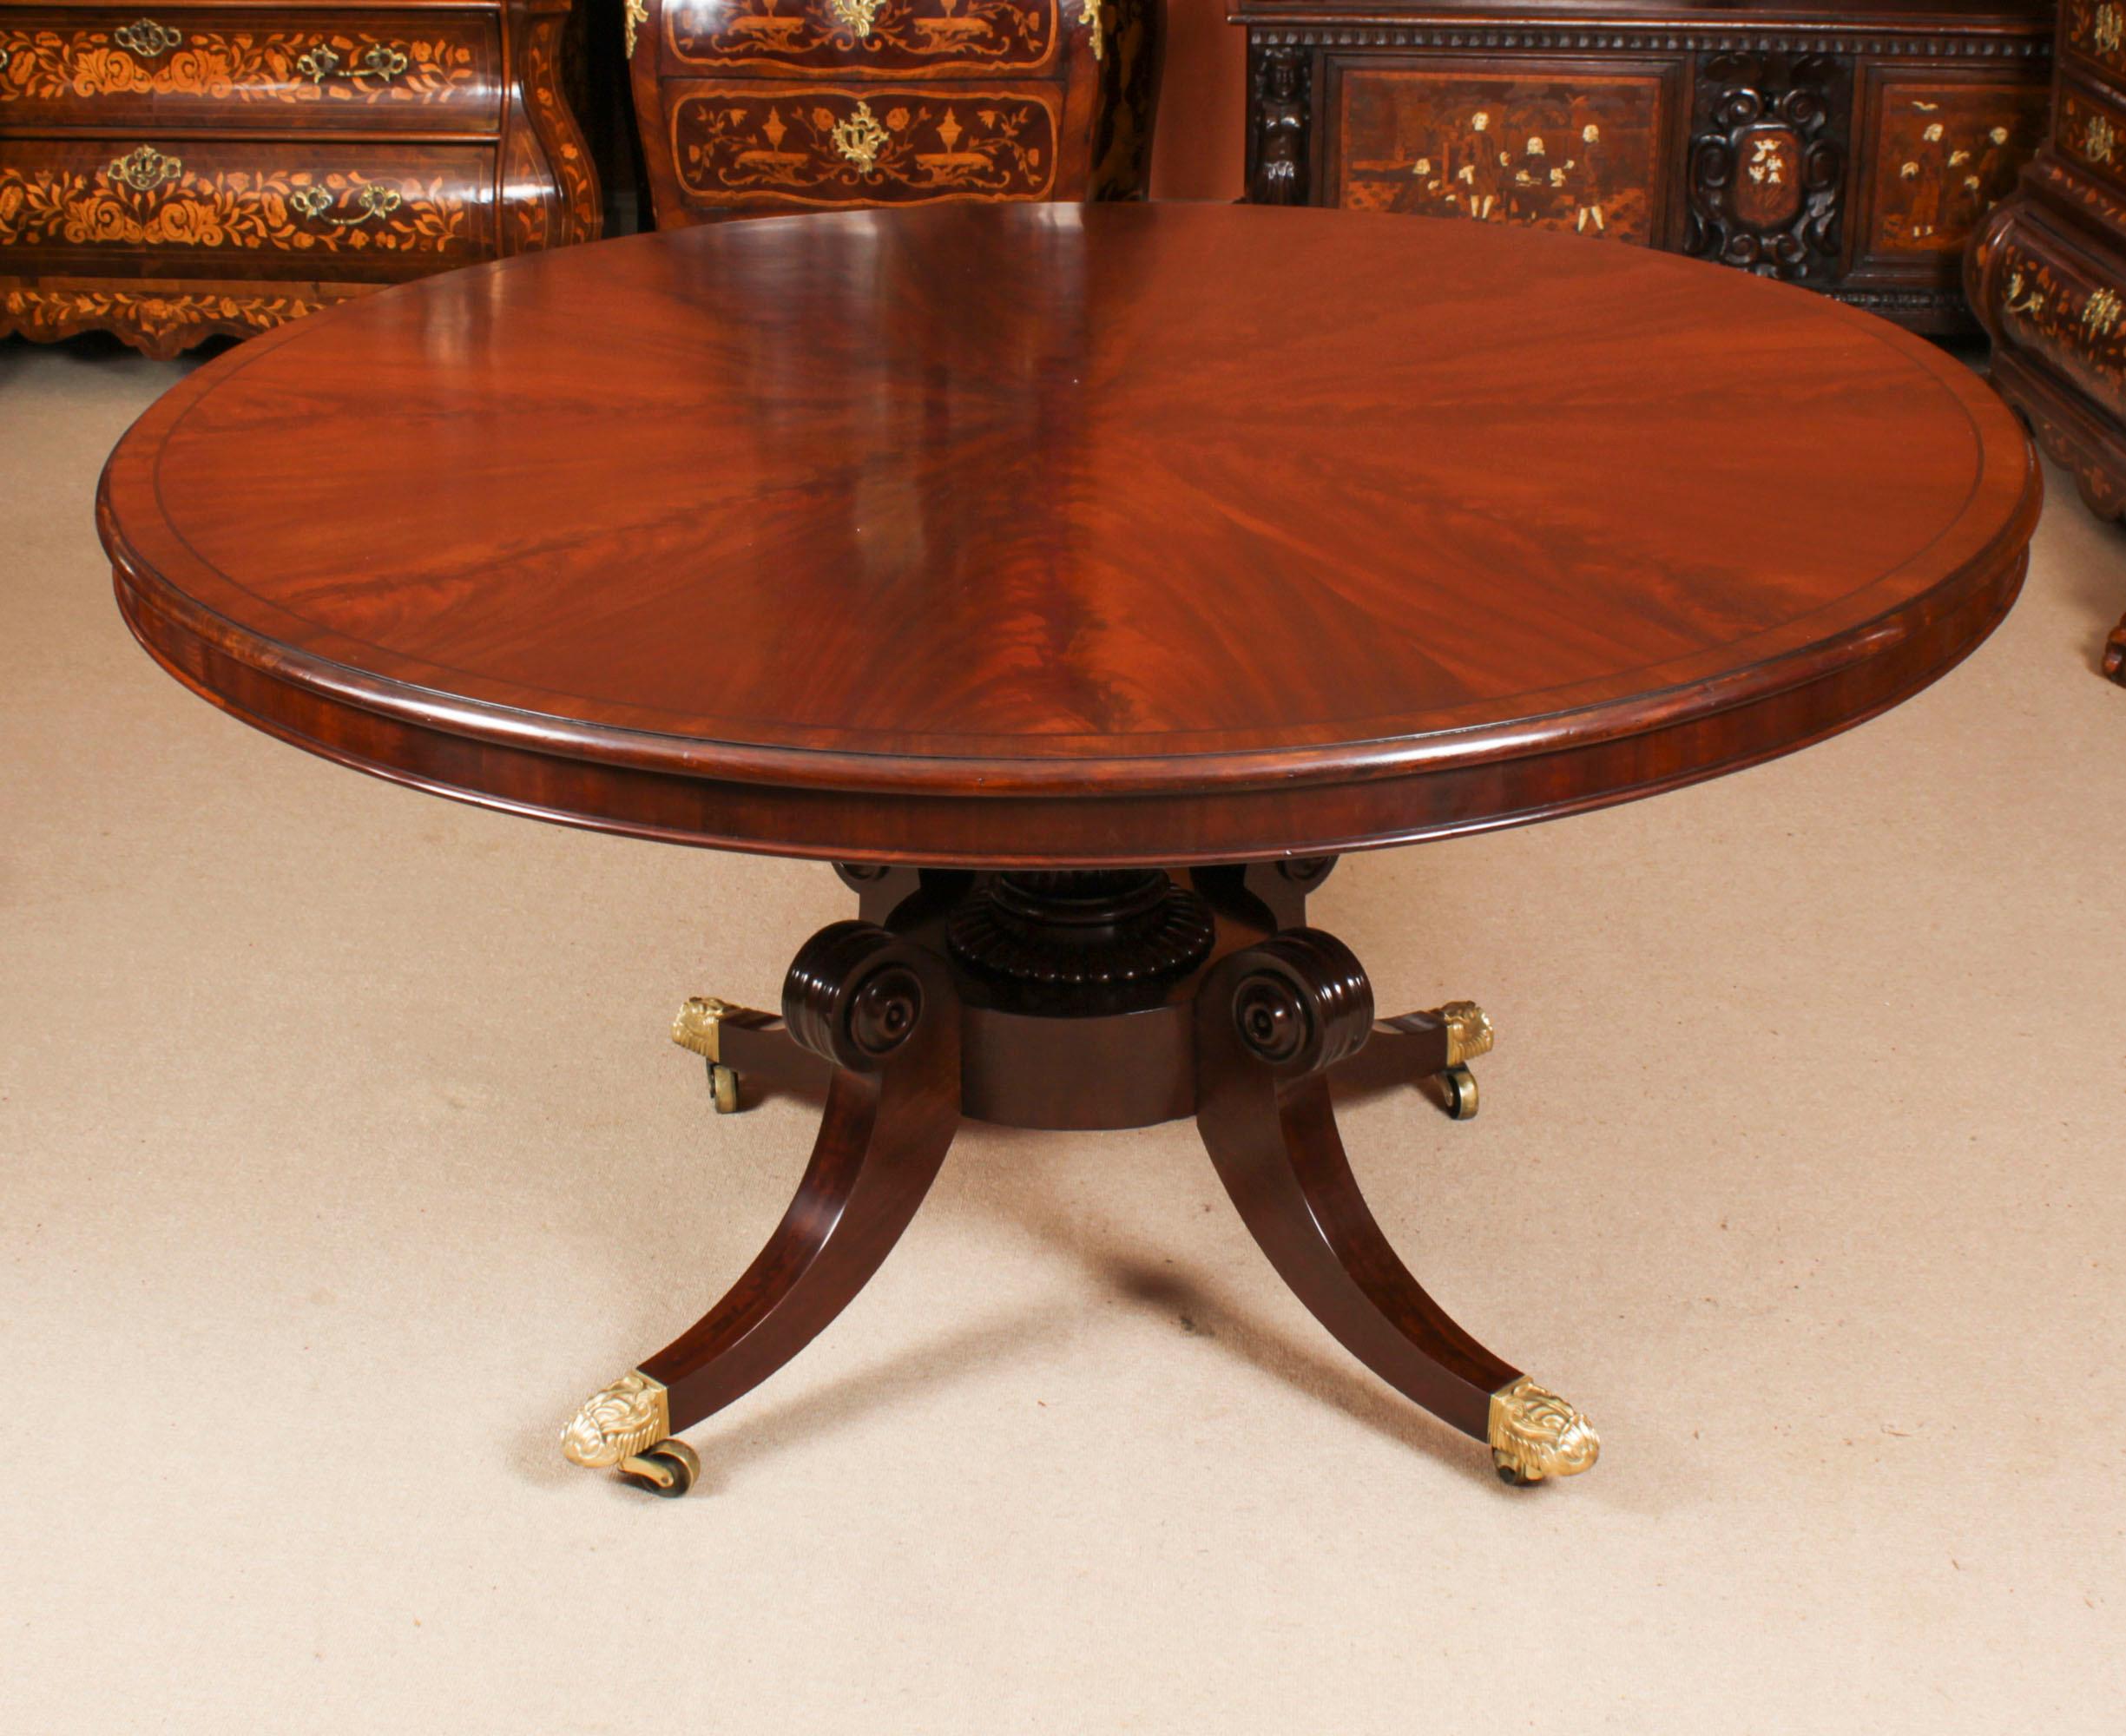 A stunning antique William IV  breakfast table / loo table, in the manner of Gillows, circa 1830 in date.

The lovely figured flame mahogany circular top that sits on a mahogany hand turned column with hand carved decoration raised on  quadruple